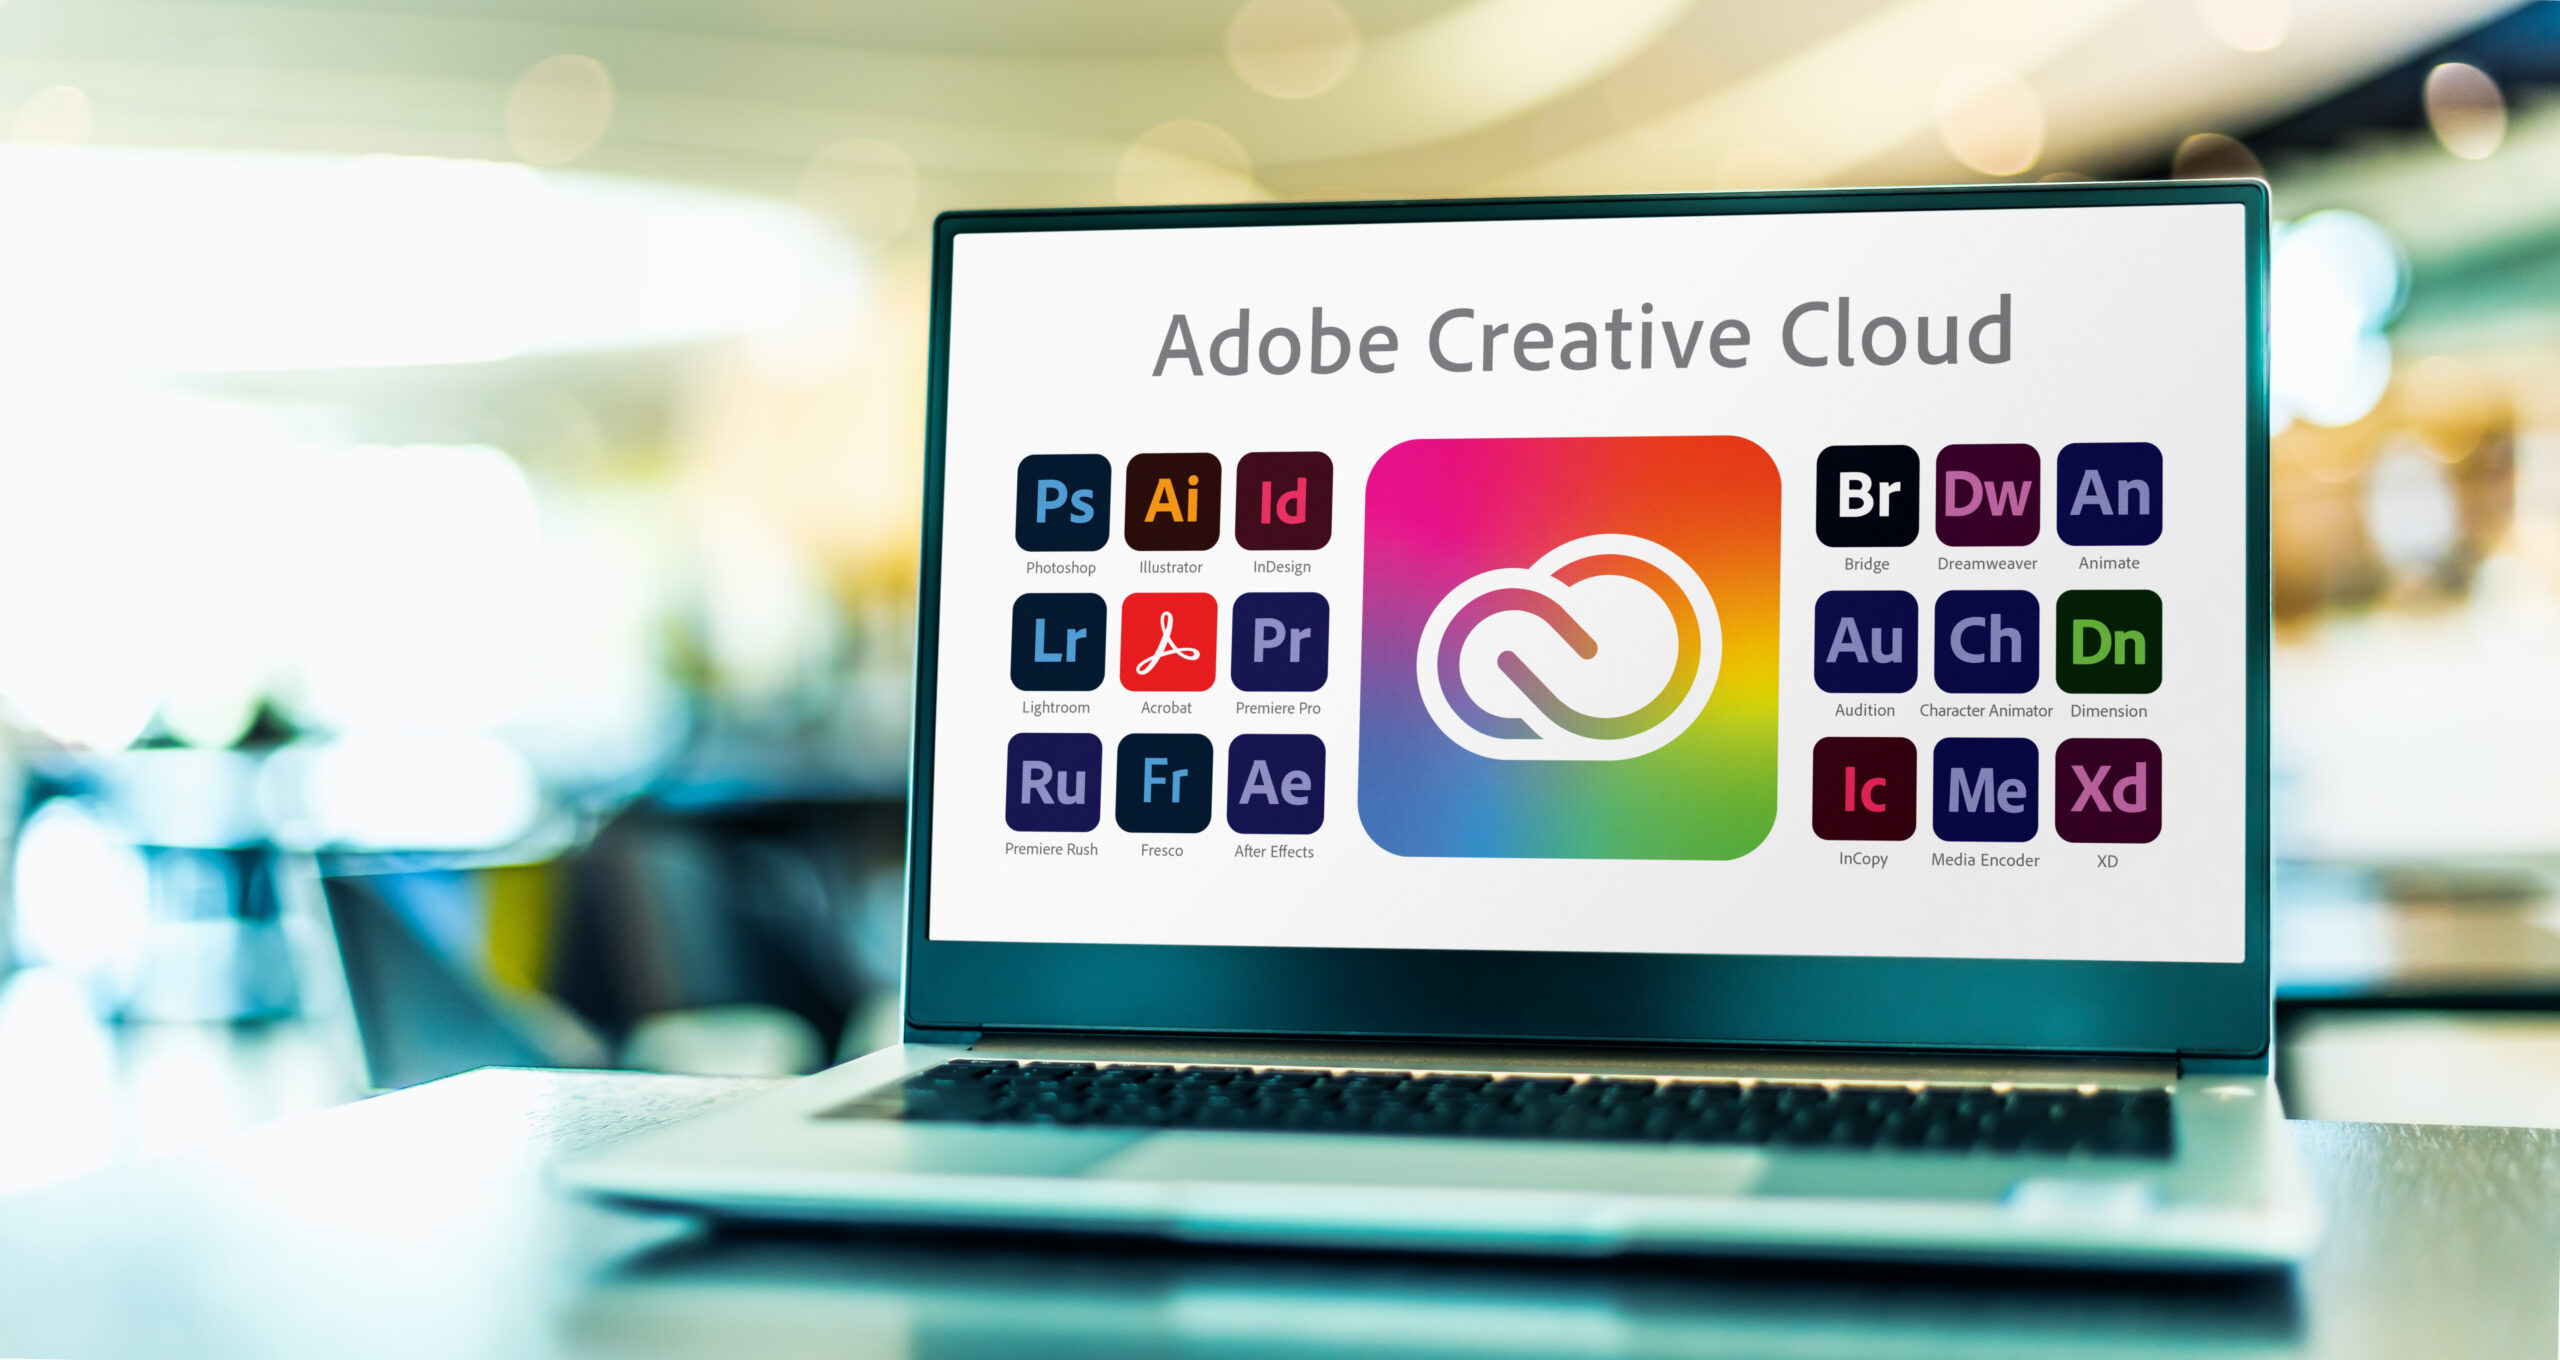 aptop computer displaying logotypes of Adobe Creative Cloud, a set of applications and services from Adobe Systems